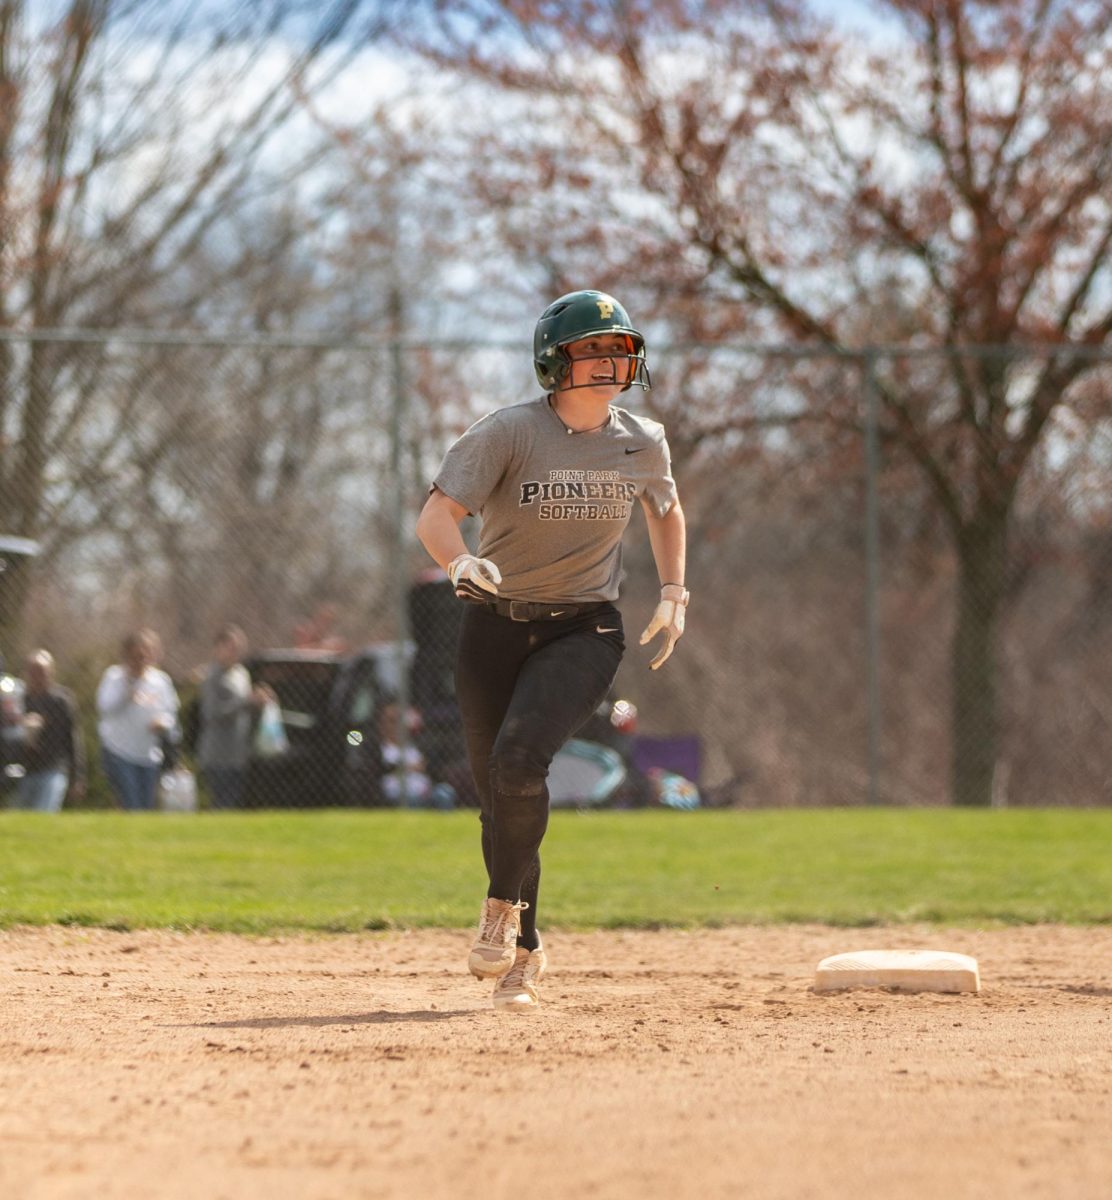 Iagnemma trotting the bases after her first collegiate home run versus Carlow University on March 28.